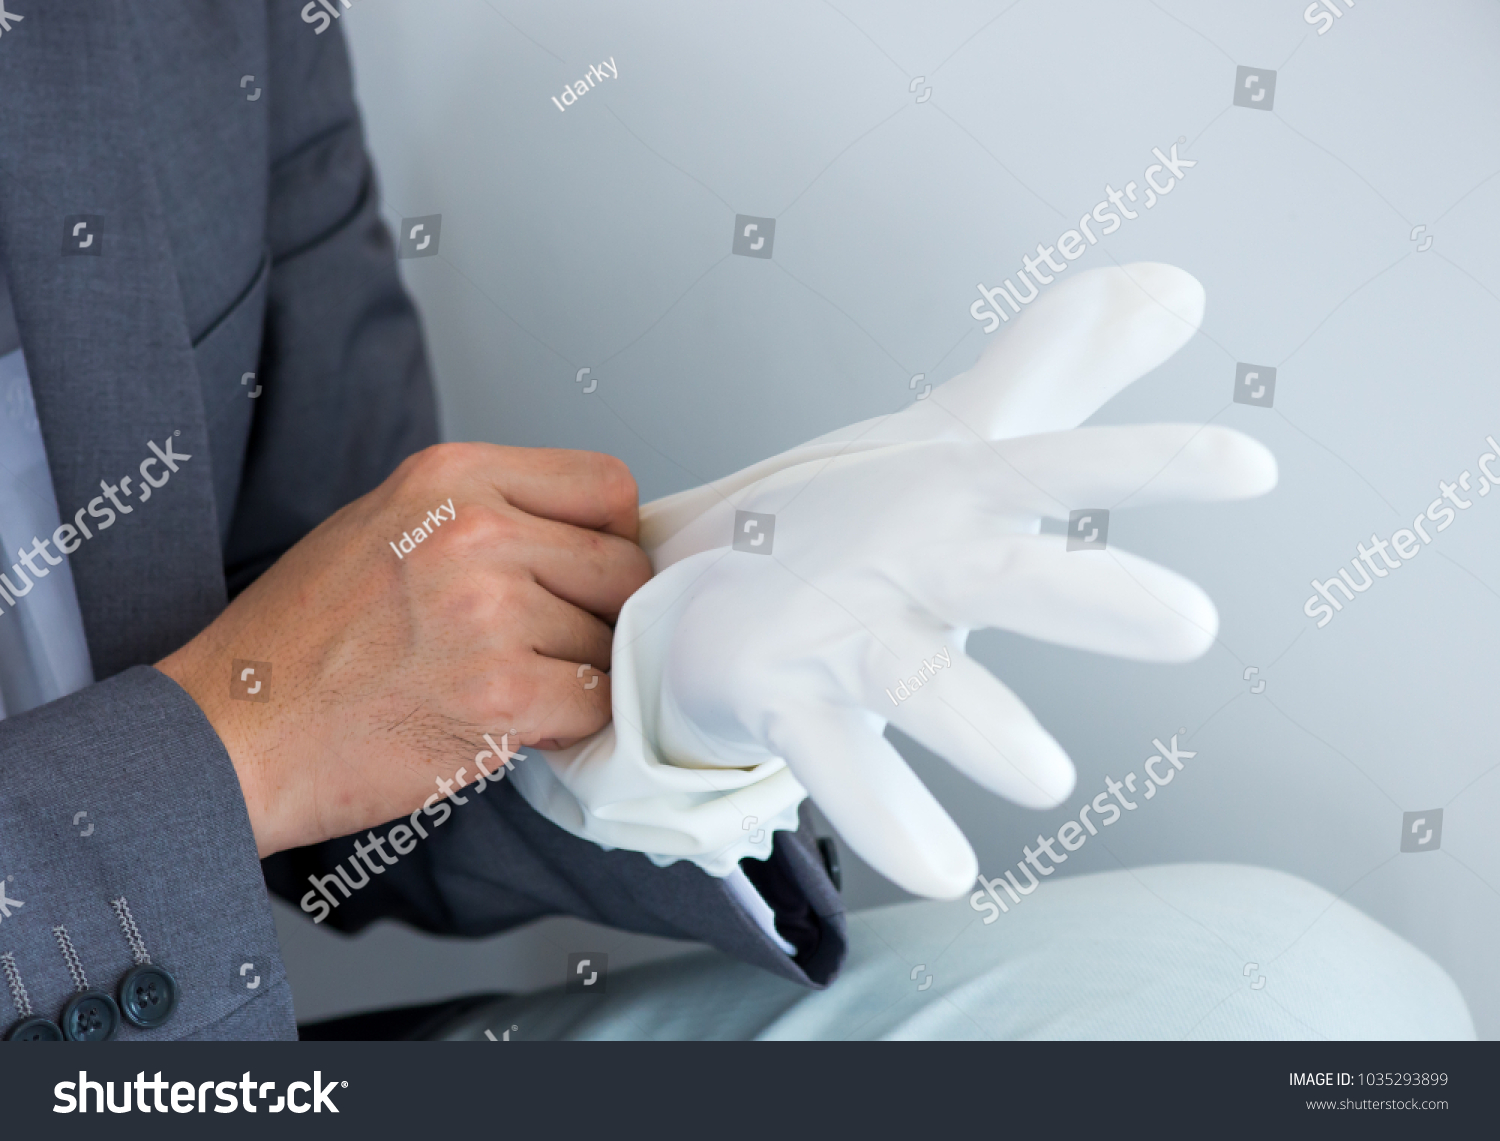 who wears white gloves